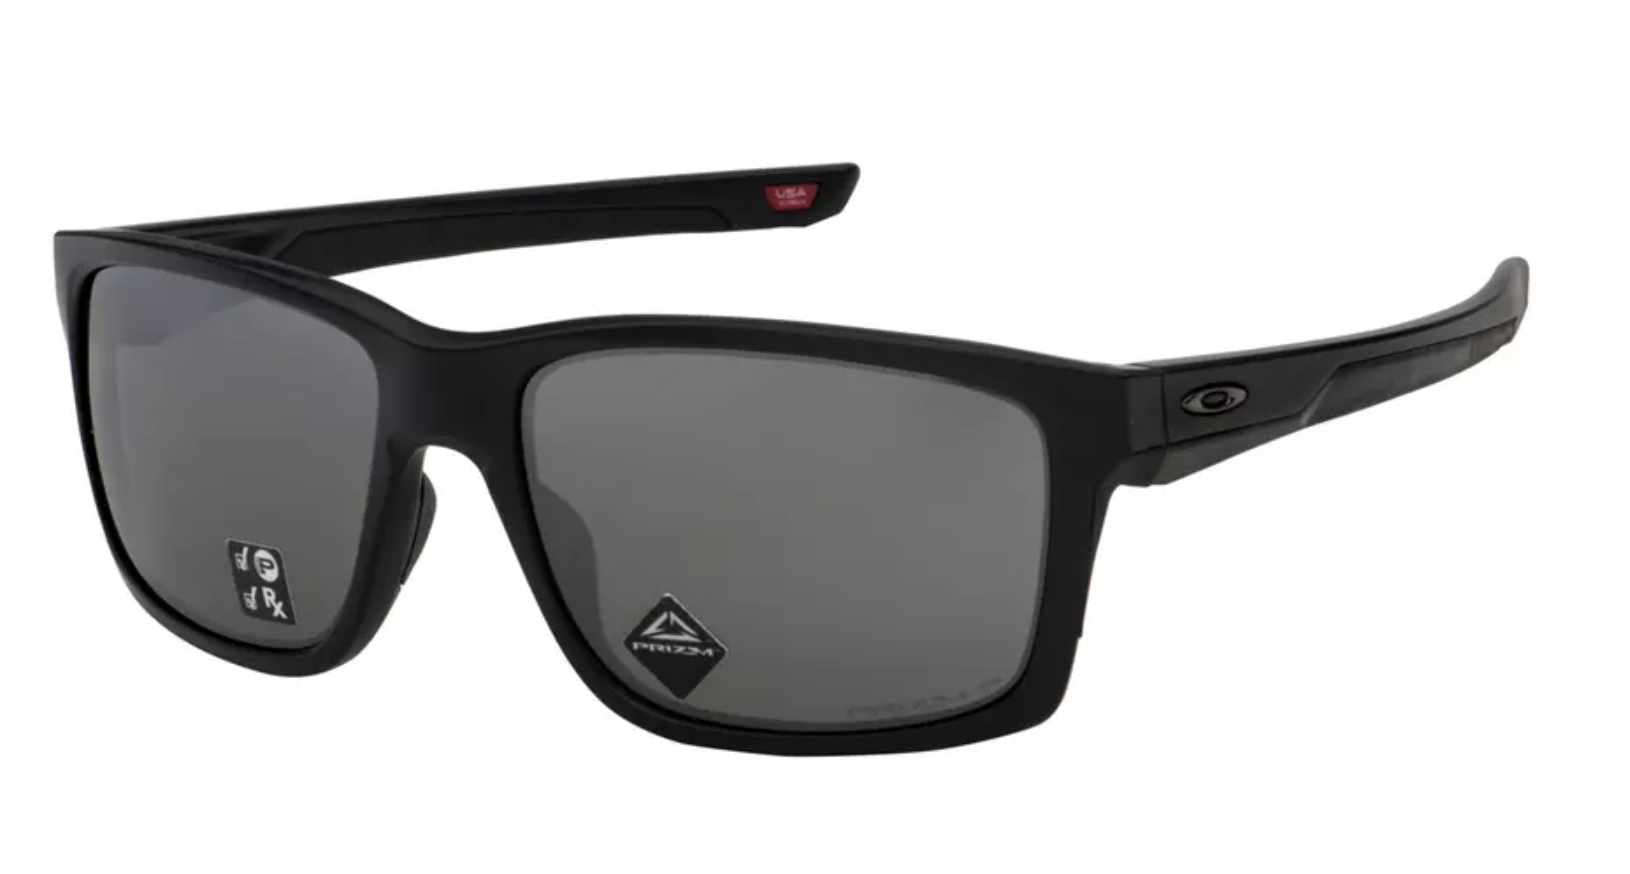 67% off on Oakley Mainlink XL Sunglasses for $69.99 + FREE SHIPPING